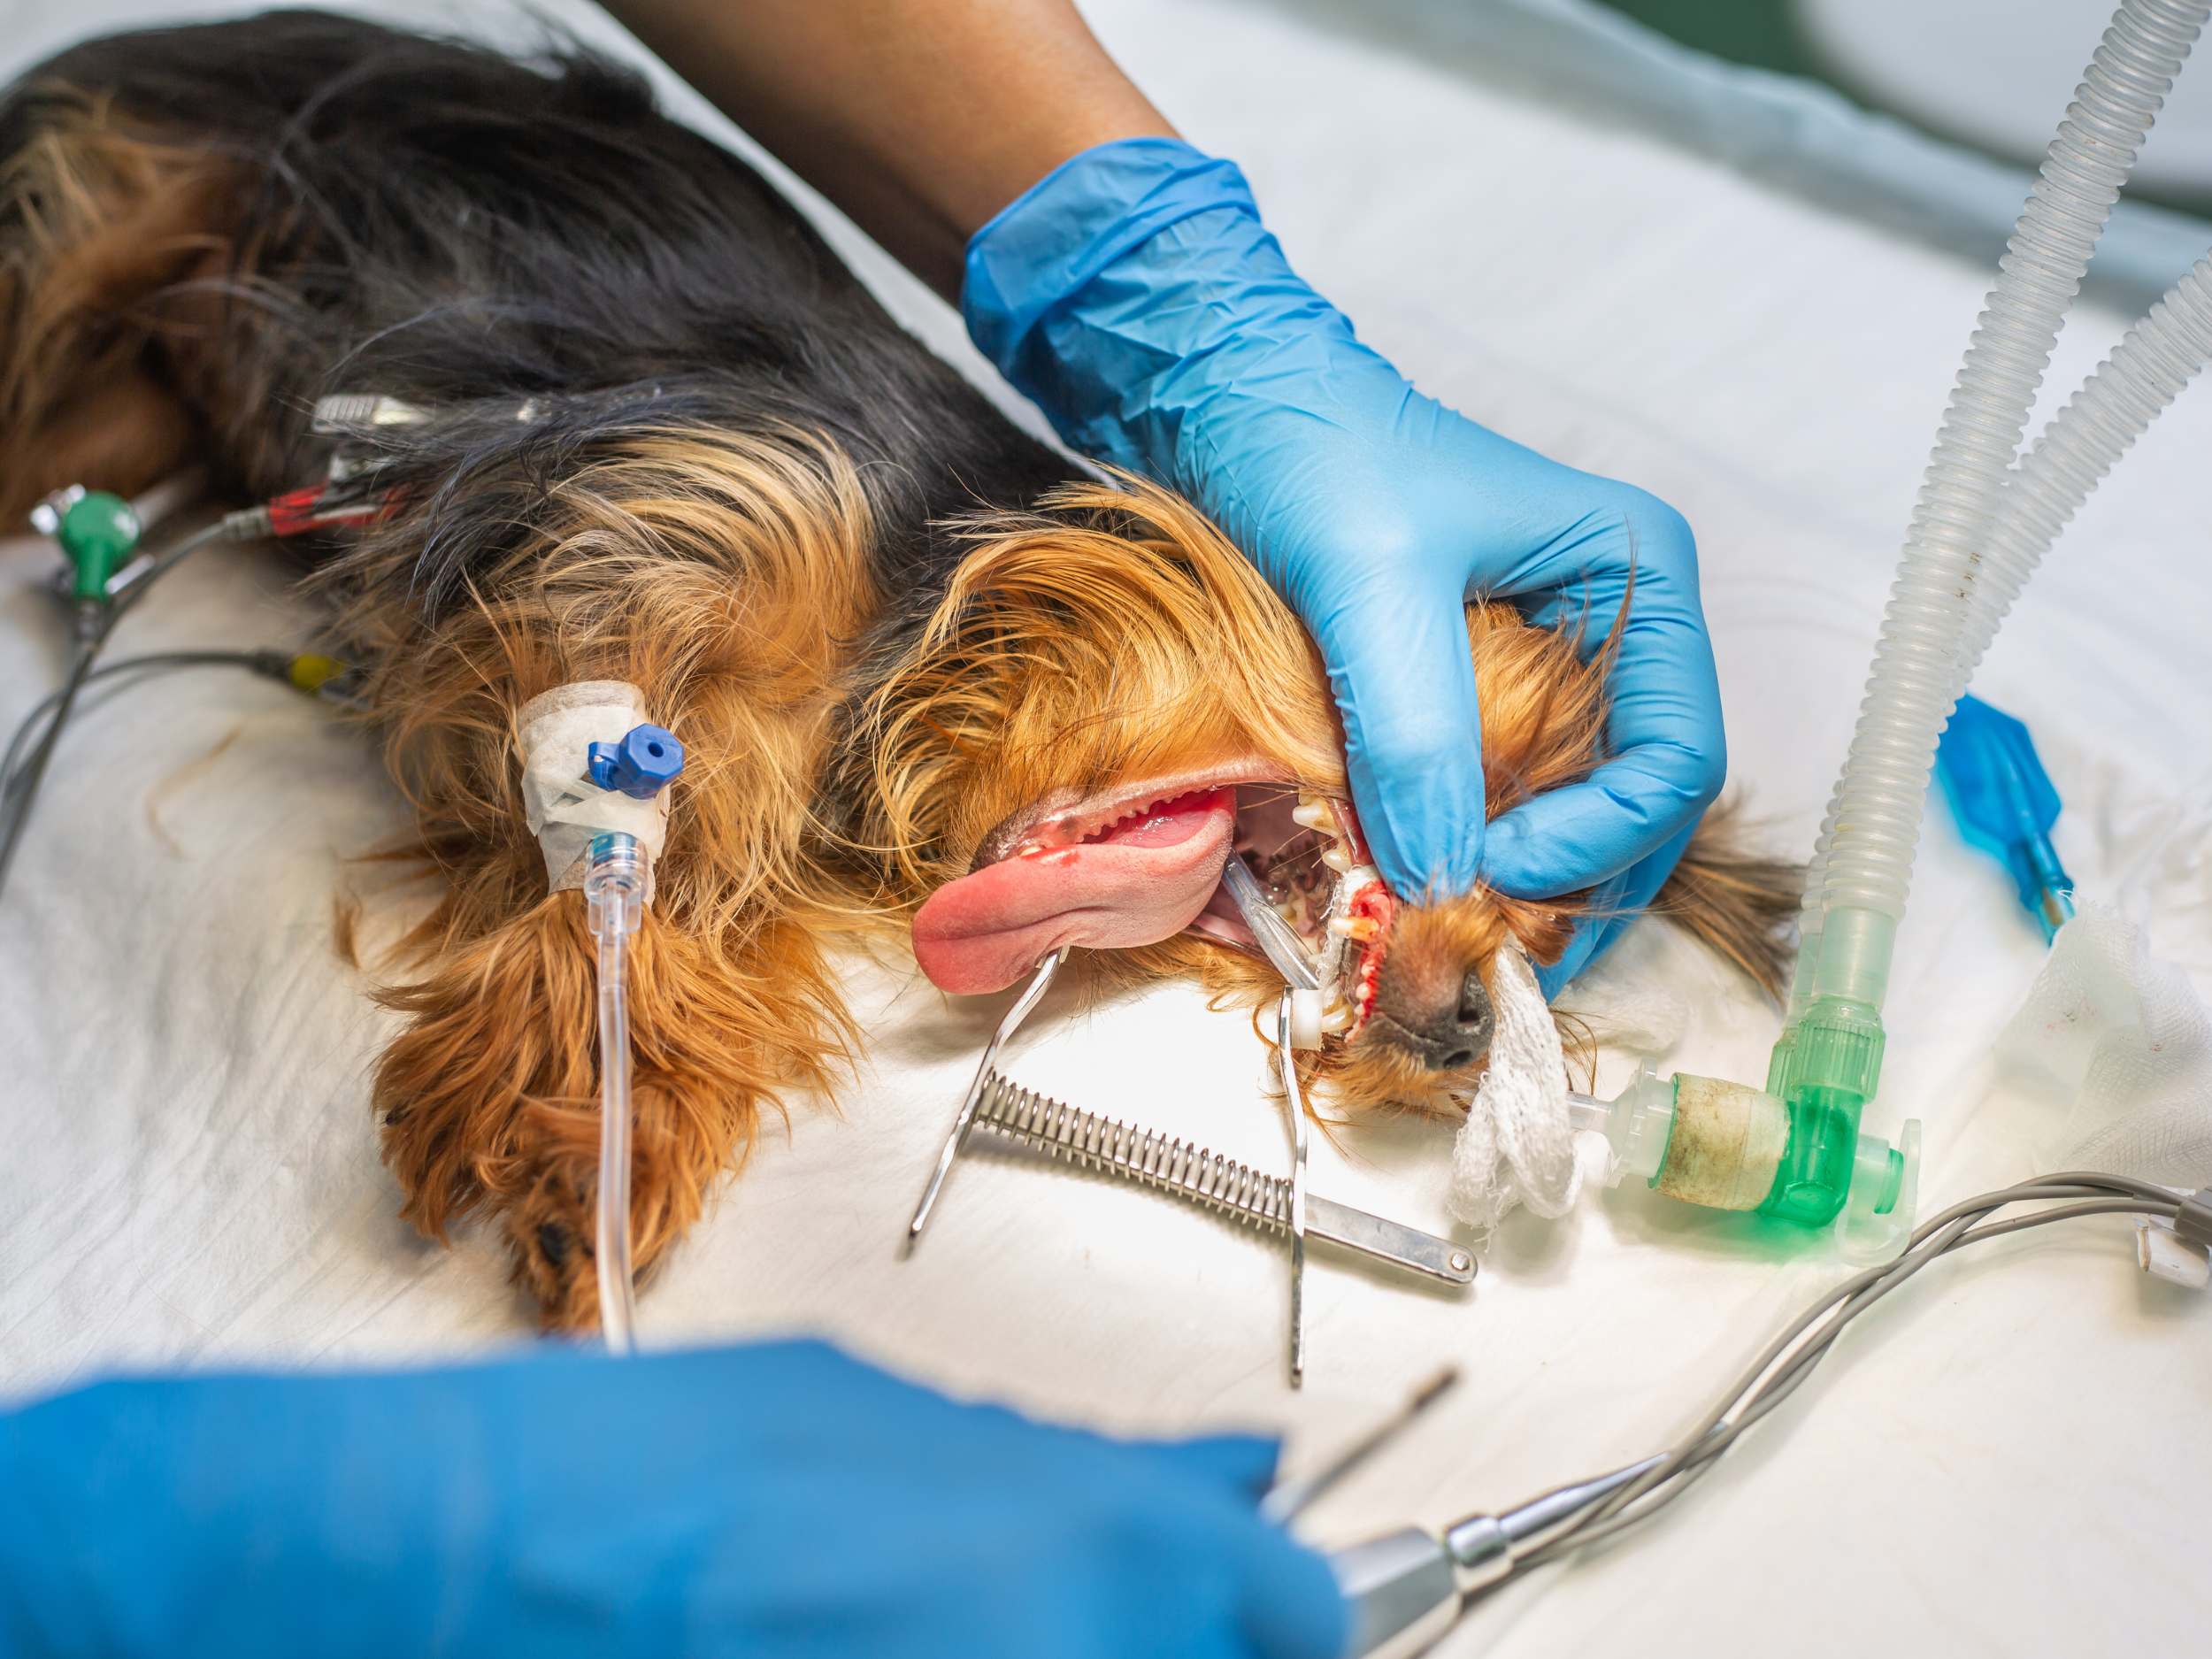 A yorkie has to have surgery for advanced gum disease in dogs